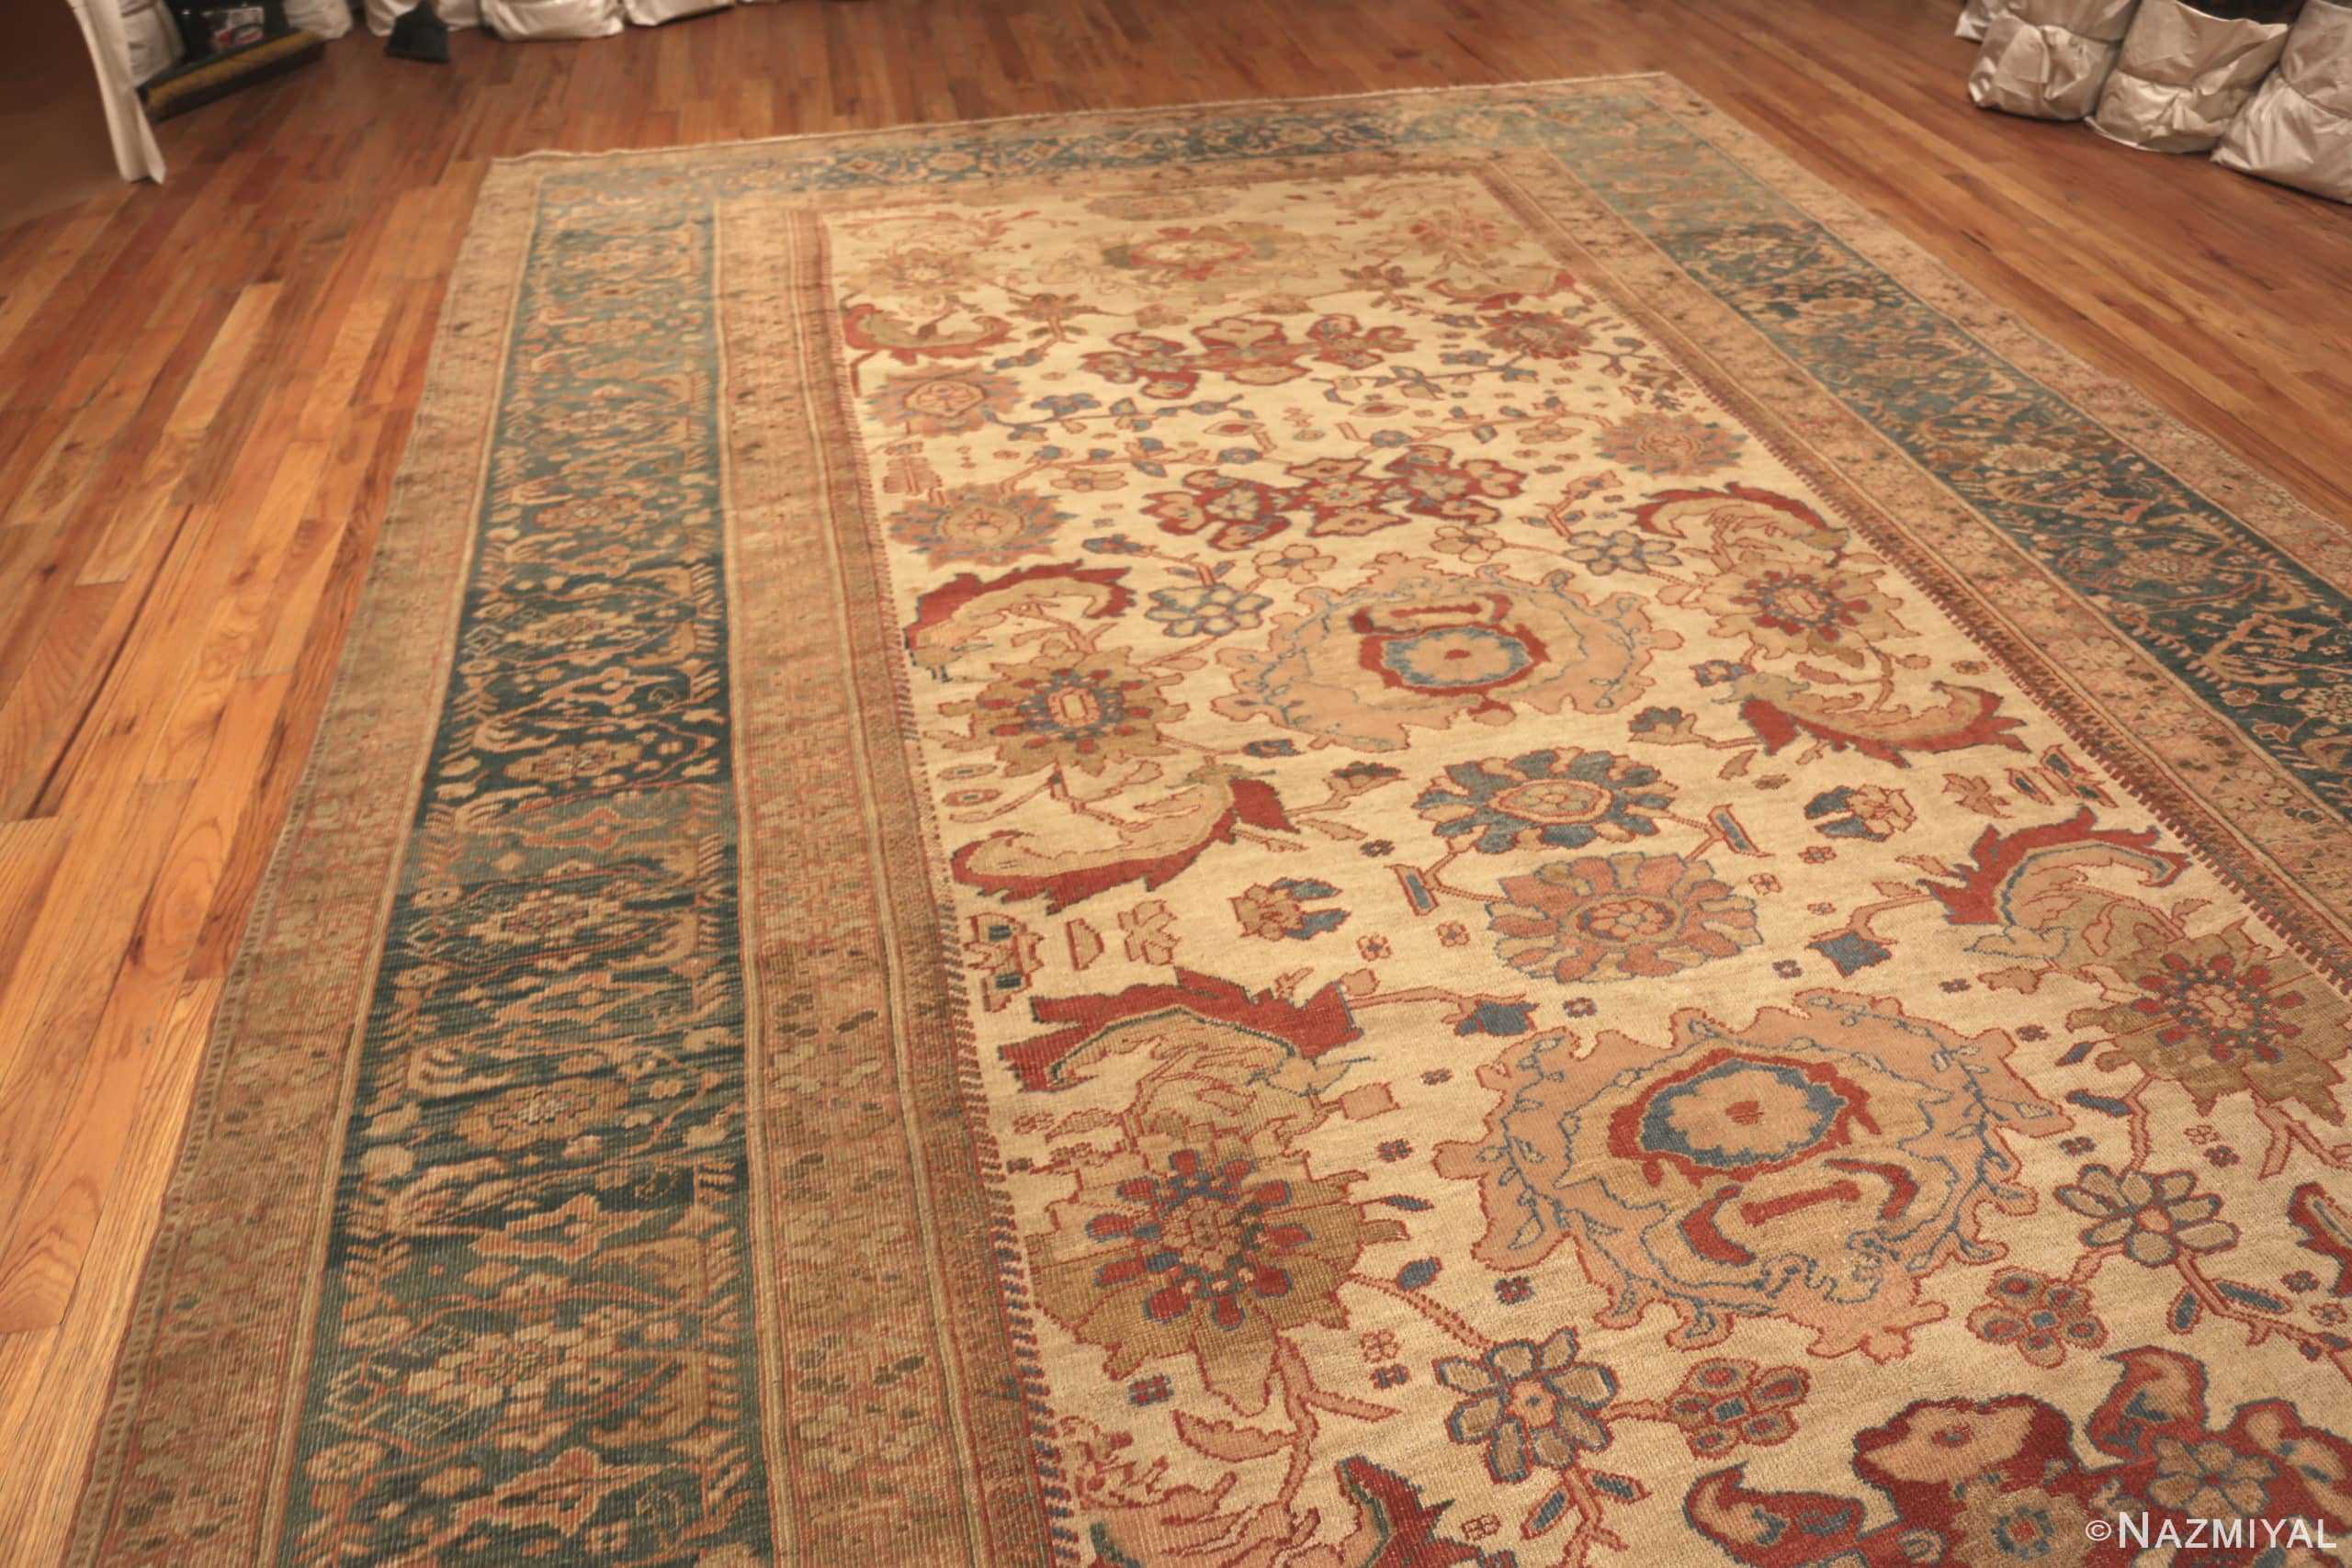 Details Of Breathtaking Antique Sultanabad Persian Rug 70341 by Nazmiyal Antique Rugs